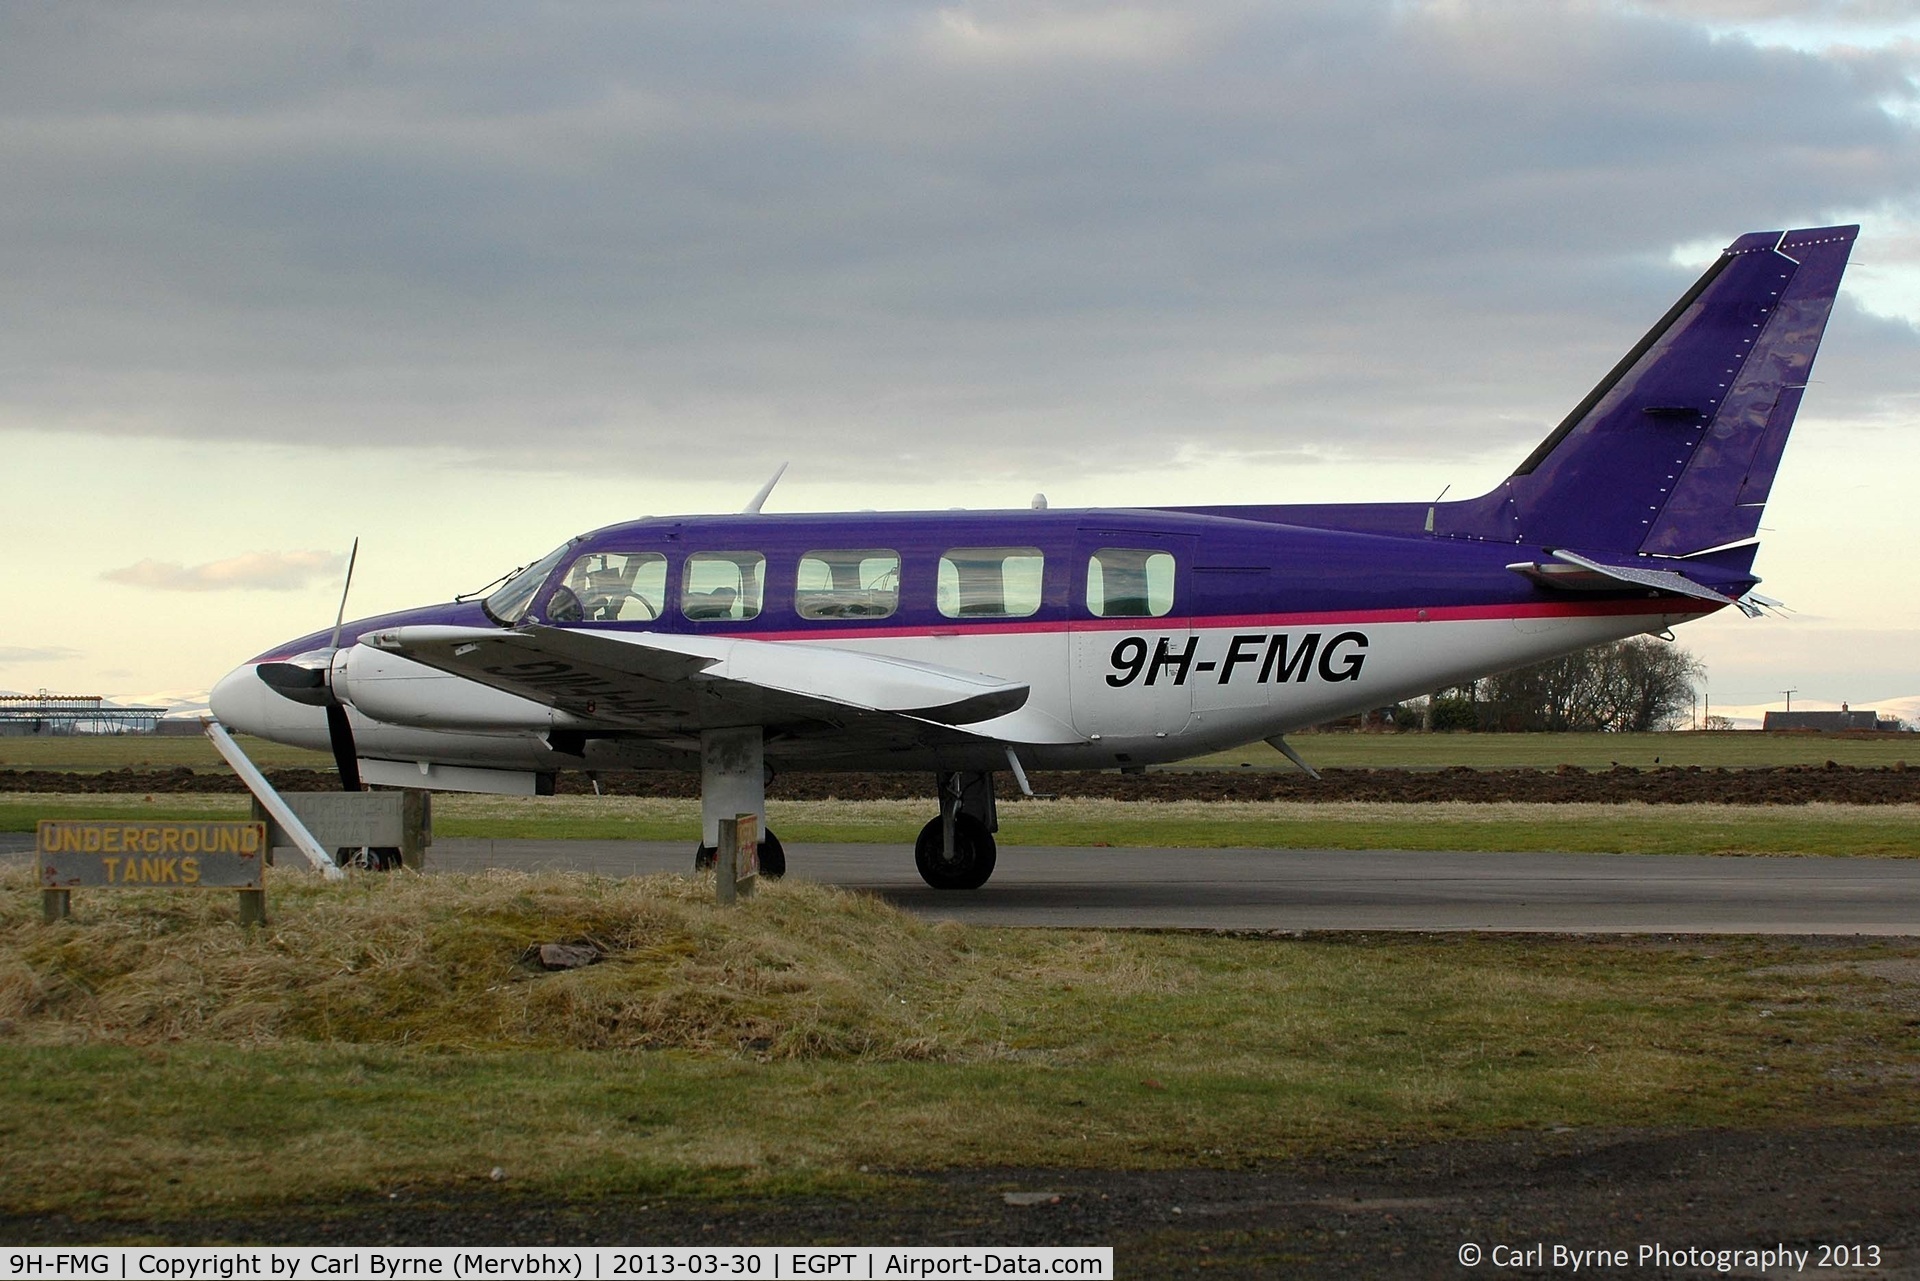 9H-FMG, 1979 Piper PA-31-350 Chieftain C/N 31-7952155, An unusual visitor to Perth-Scone.